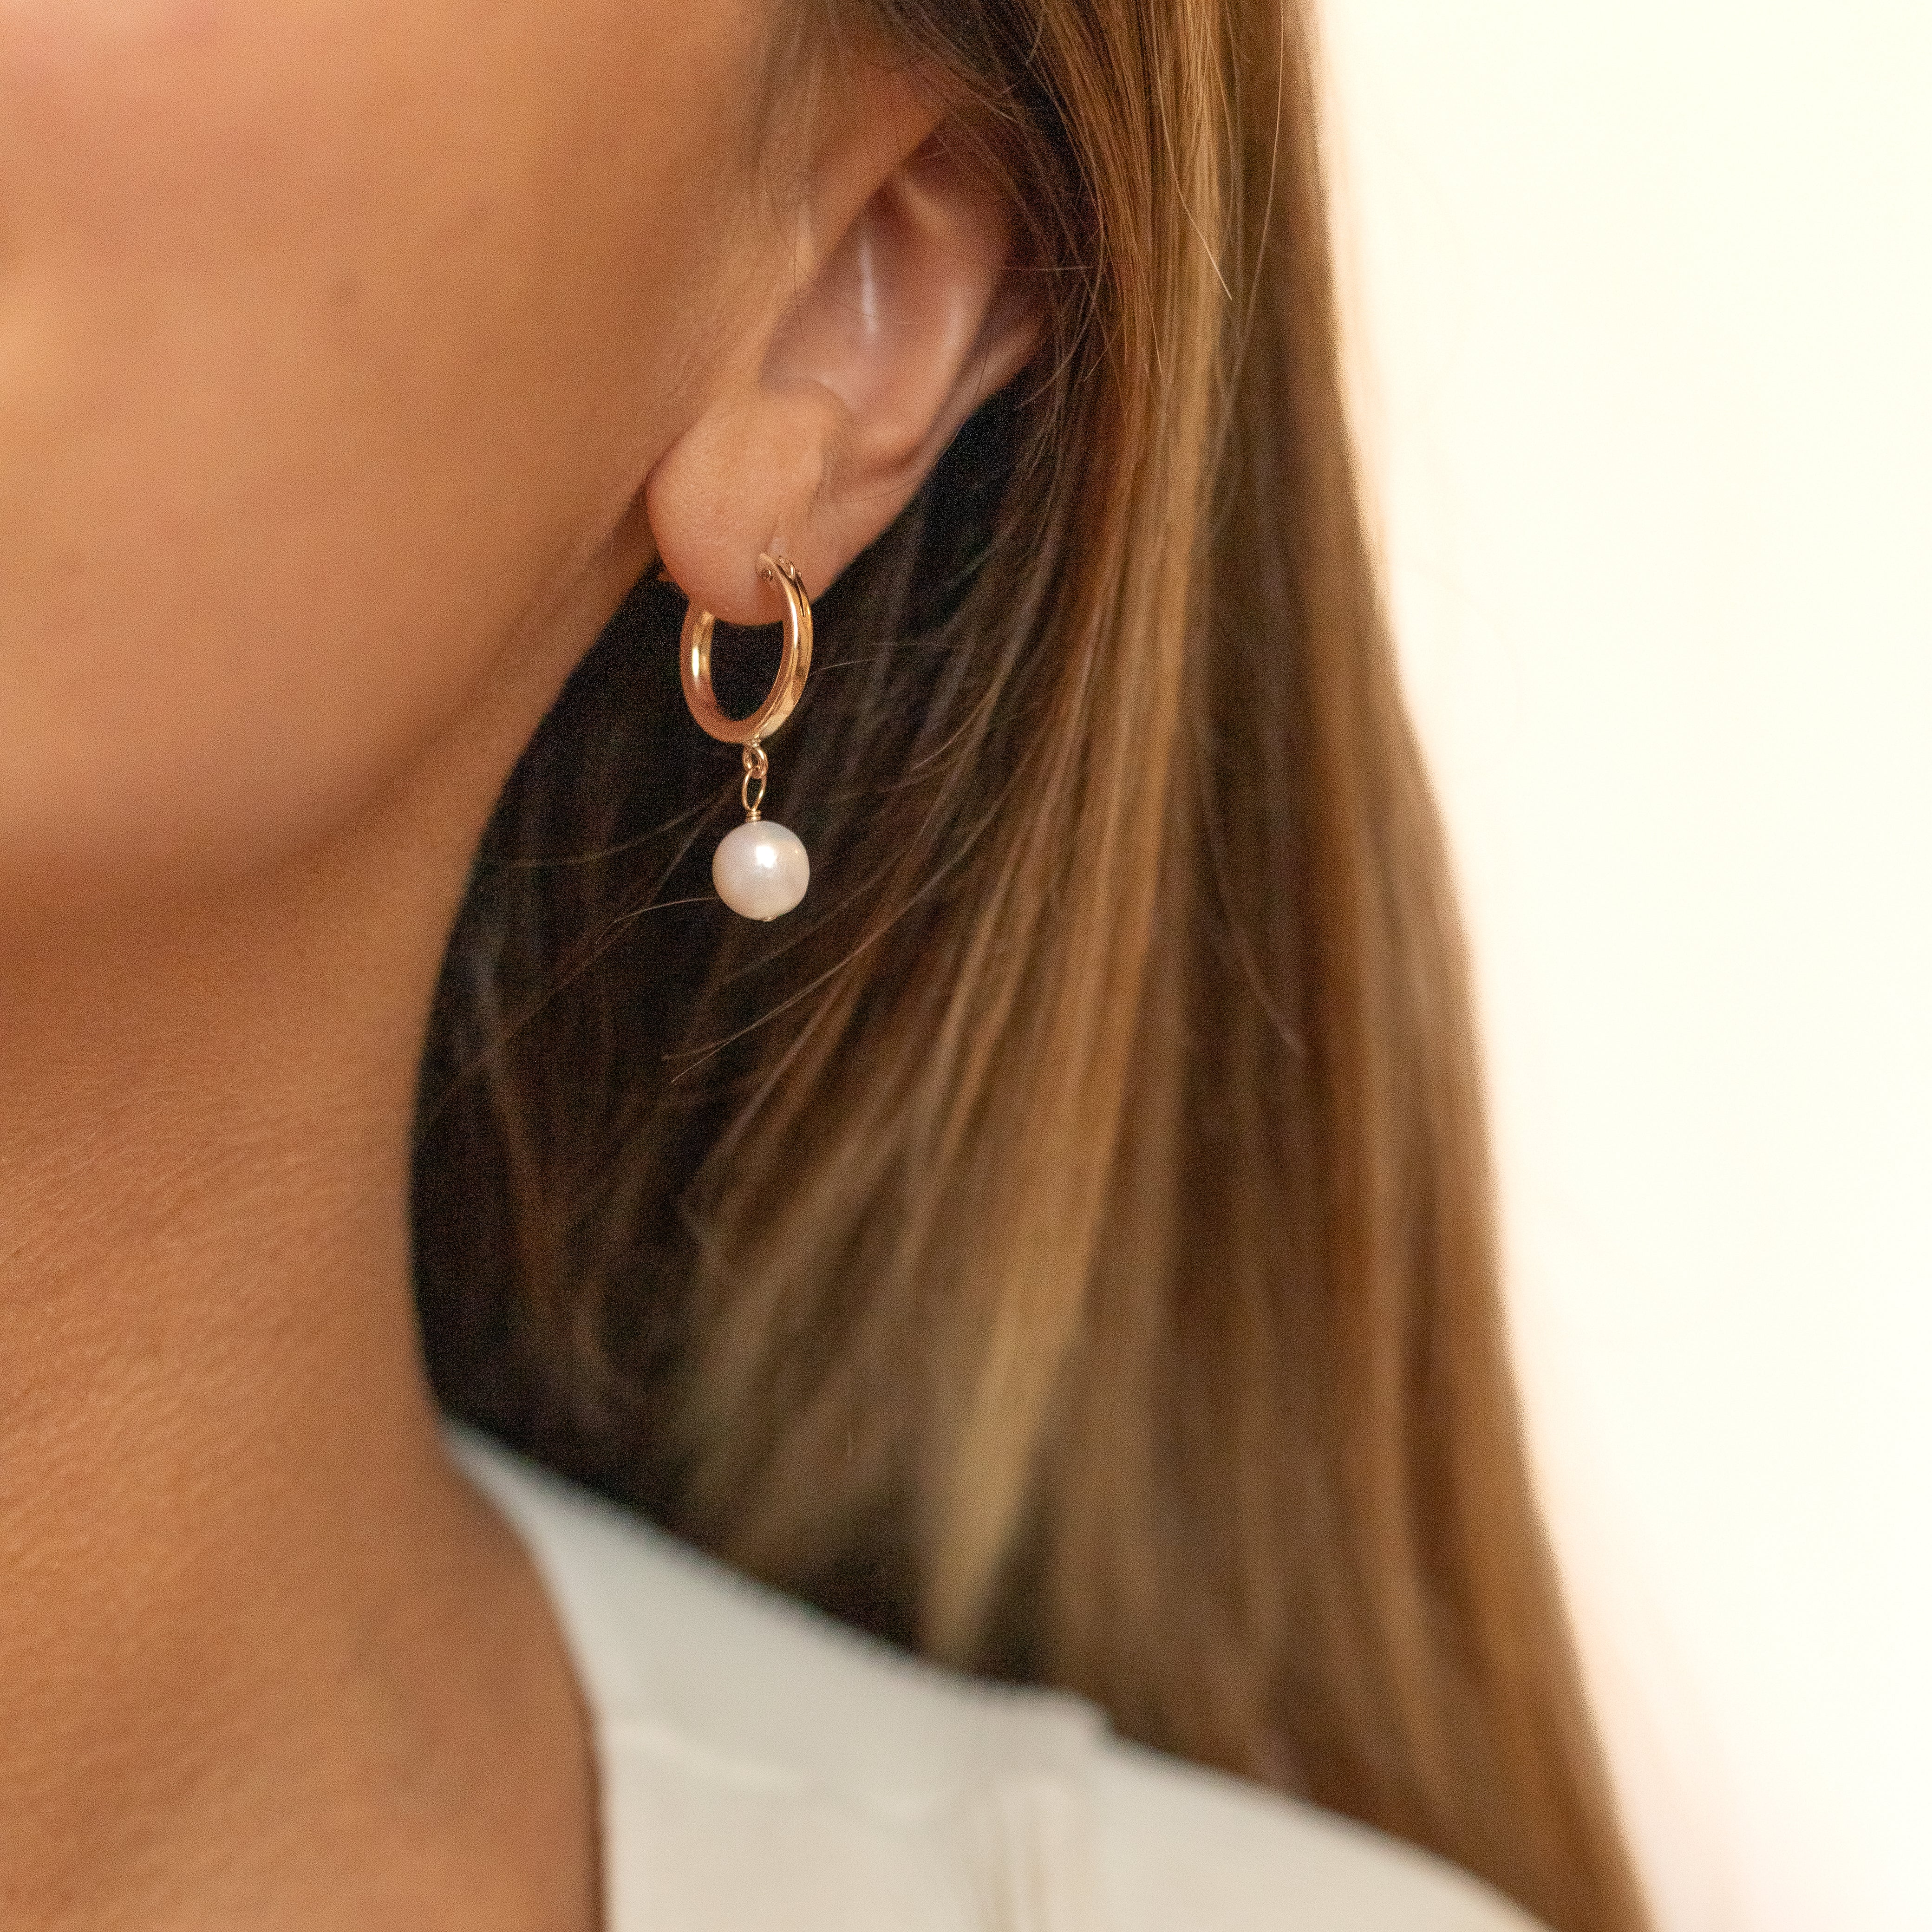 18 millimeter gold filled hoops with a tiny pearl wire wrapped to hang from the bottom. Shown in a woman's ear. 